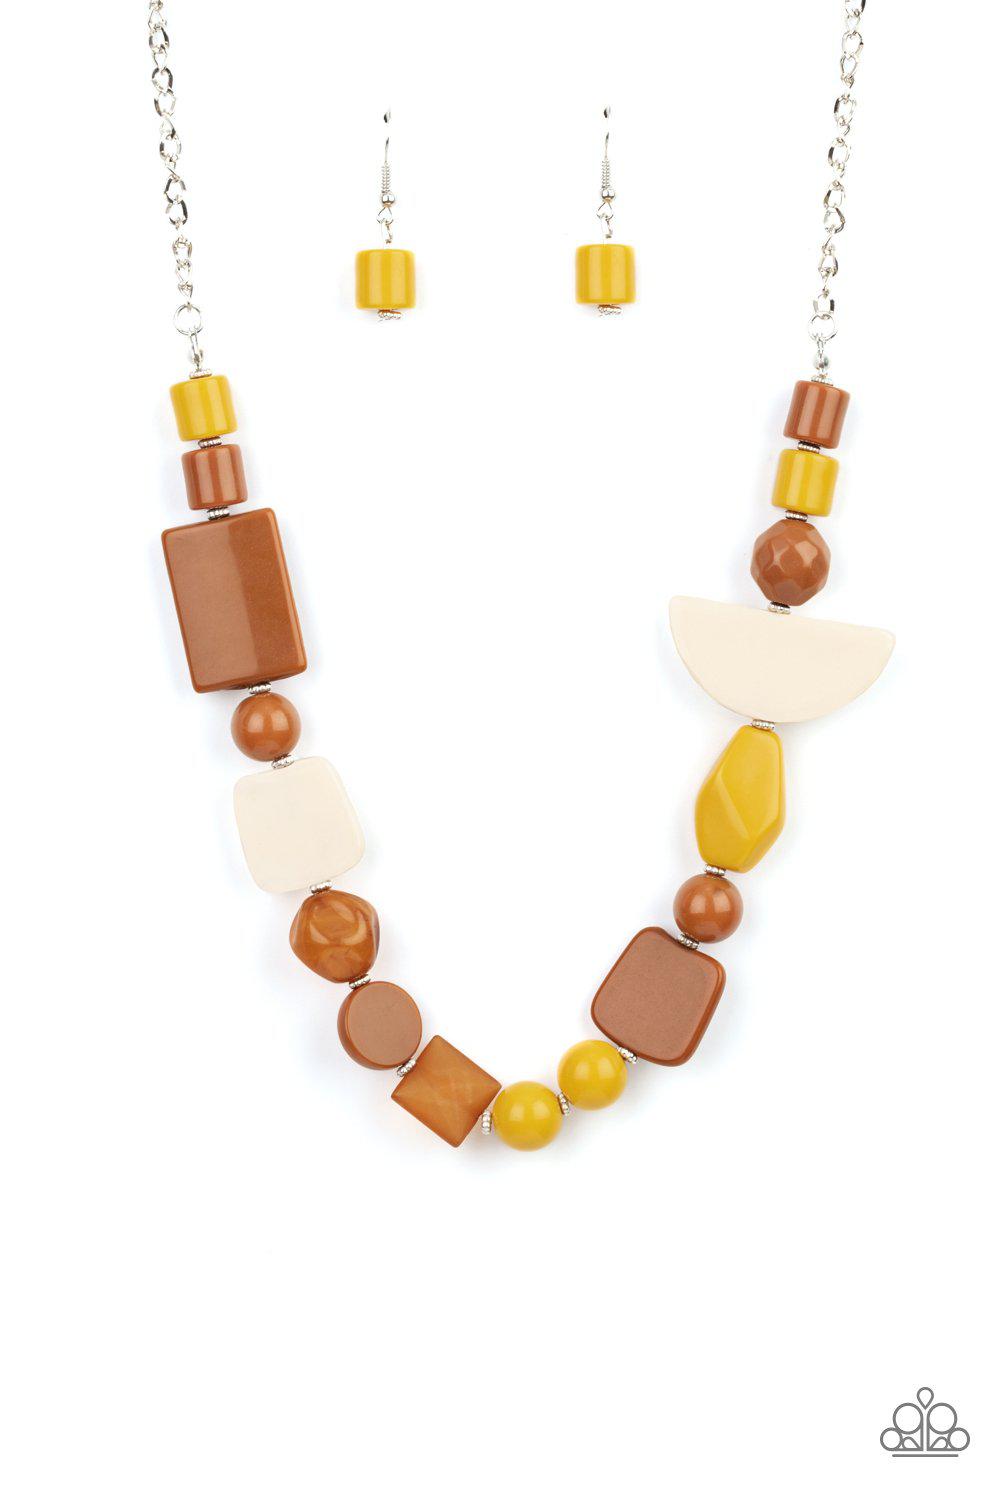 Tranquil Trendsetter Yellow and Brown Abstract Acrylic Necklace - Paparazzi Accessories 2021 Convention Exclusive- lightbox - CarasShop.com - $5 Jewelry by Cara Jewels